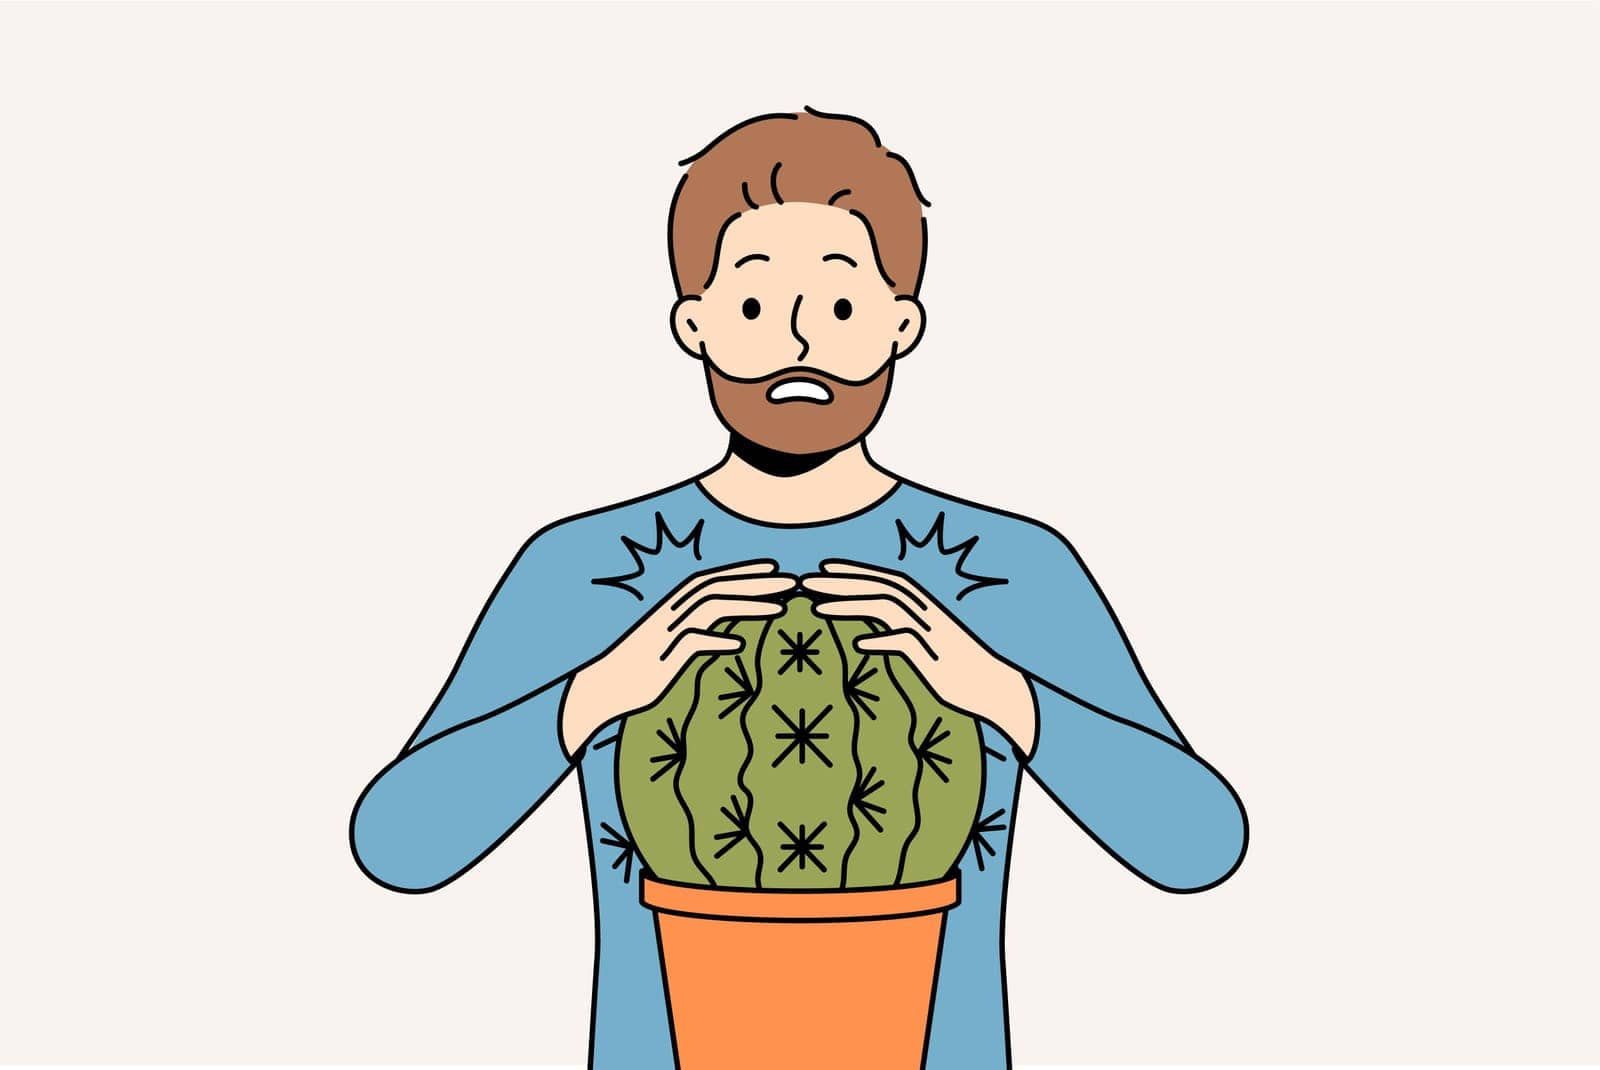 Man is scared and touches cactus and gets wound for concept of problems associated with unshaven hair and need for depilation. Funny stupid guy pricked himself touching cactus in pot